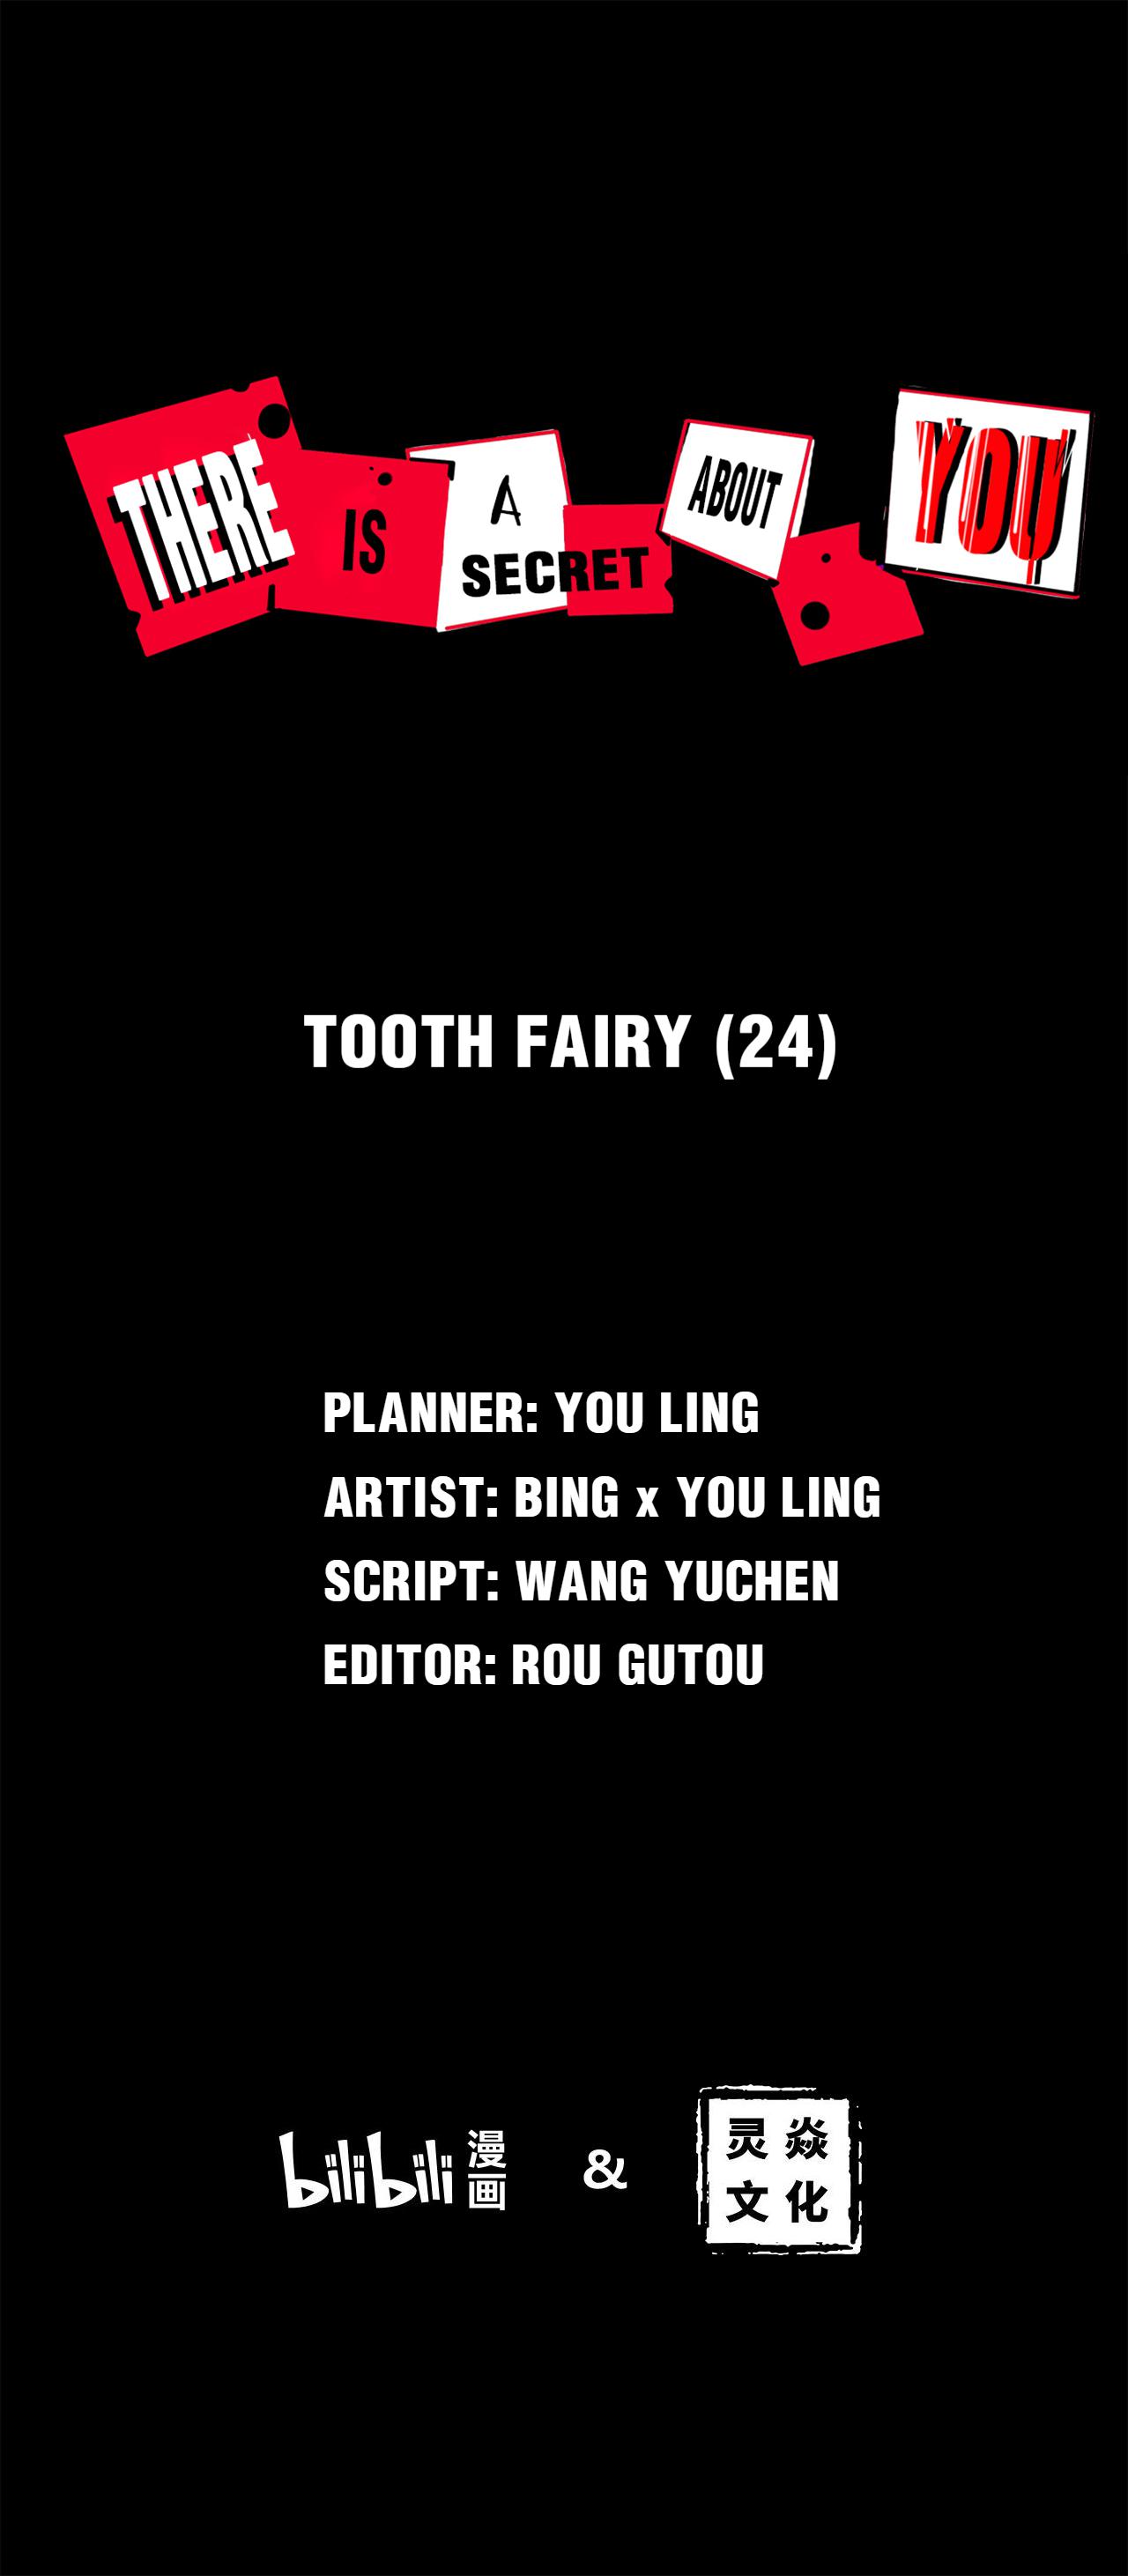 There is a Secret About You 24 Tooth Fairy (24)